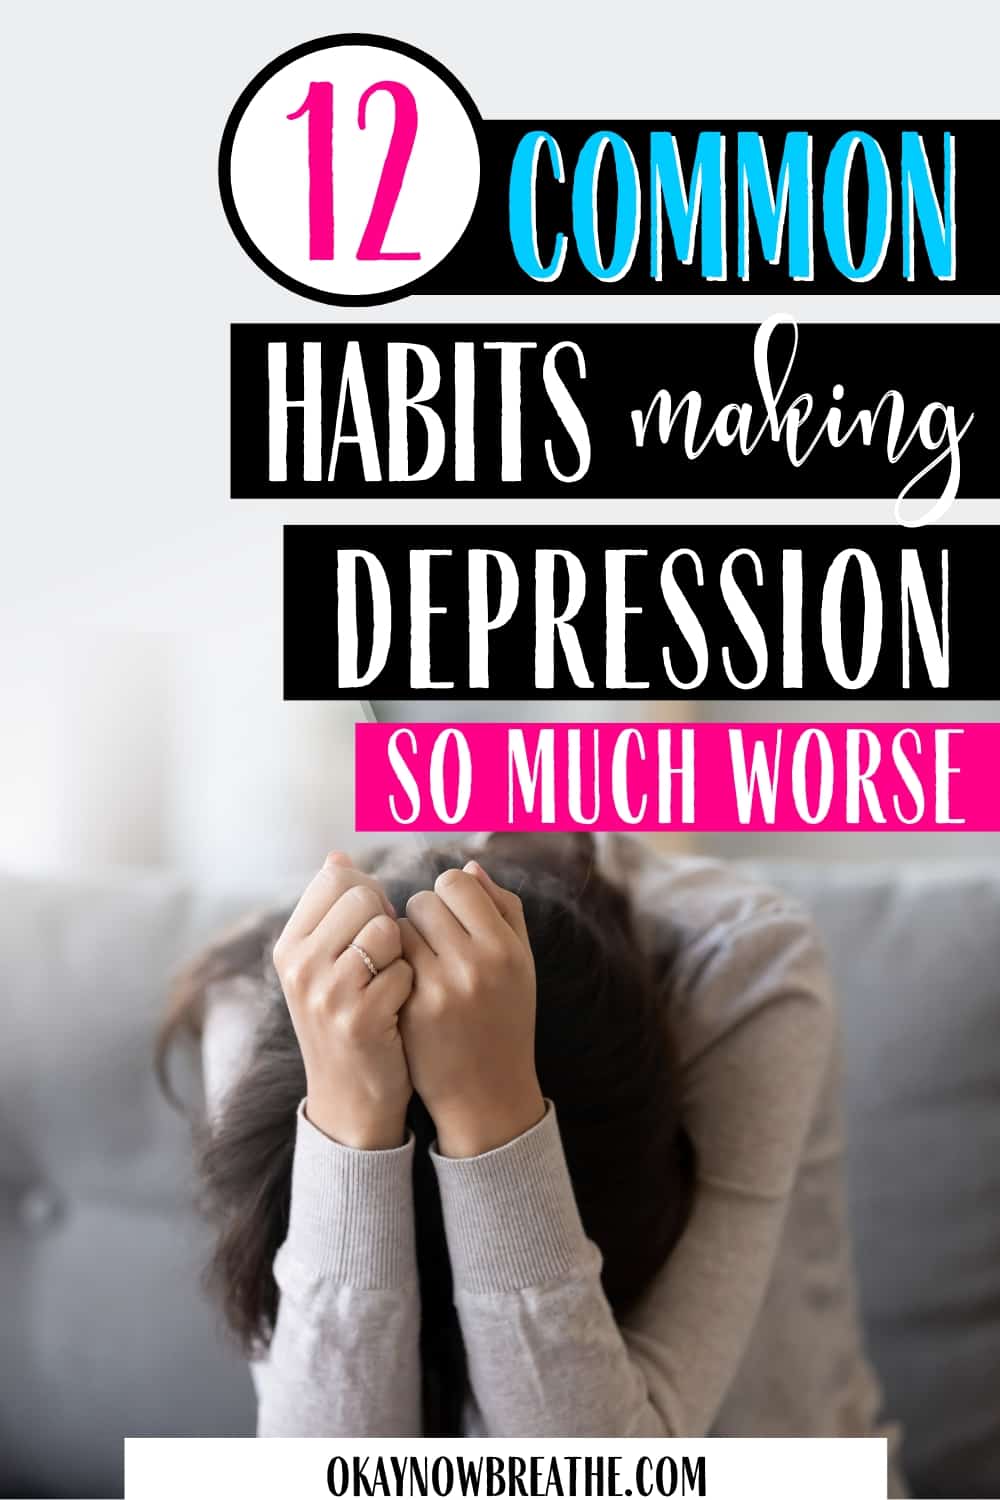 There is a female on a couch with her head down, hands on the top of her head, and elbows on her knees. Above to the right, there is text: 12 common habits making your depression so much worse.